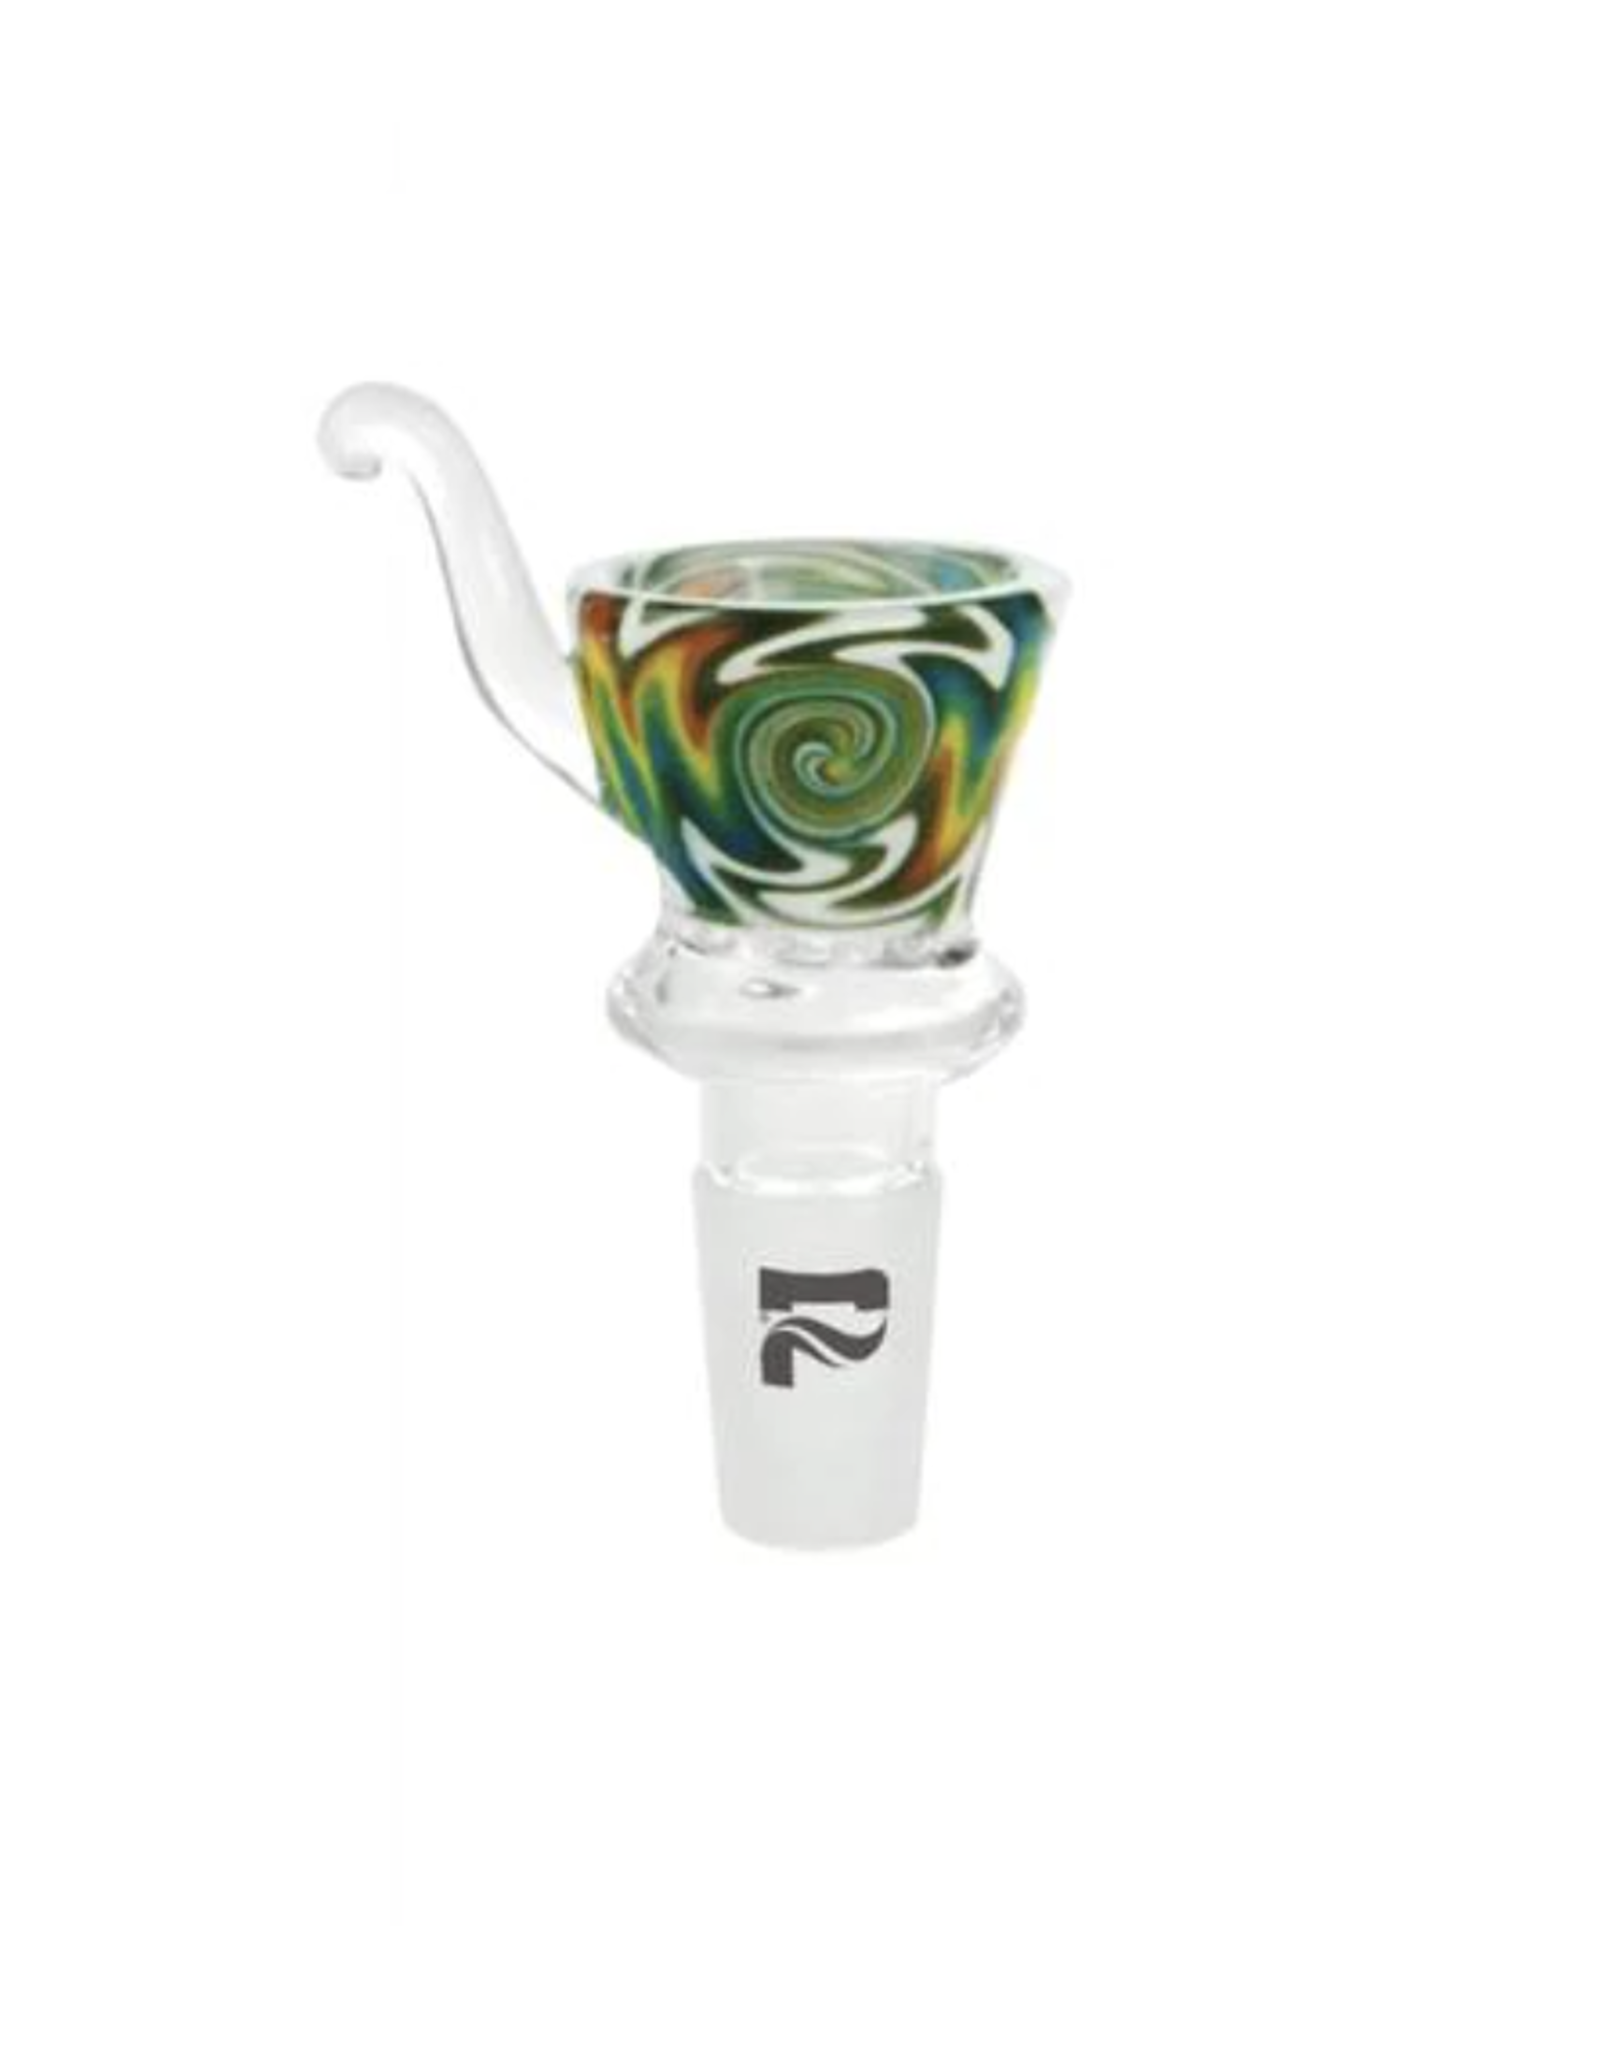 Pulsar 14mm Male Worked Bowl by Pulsar